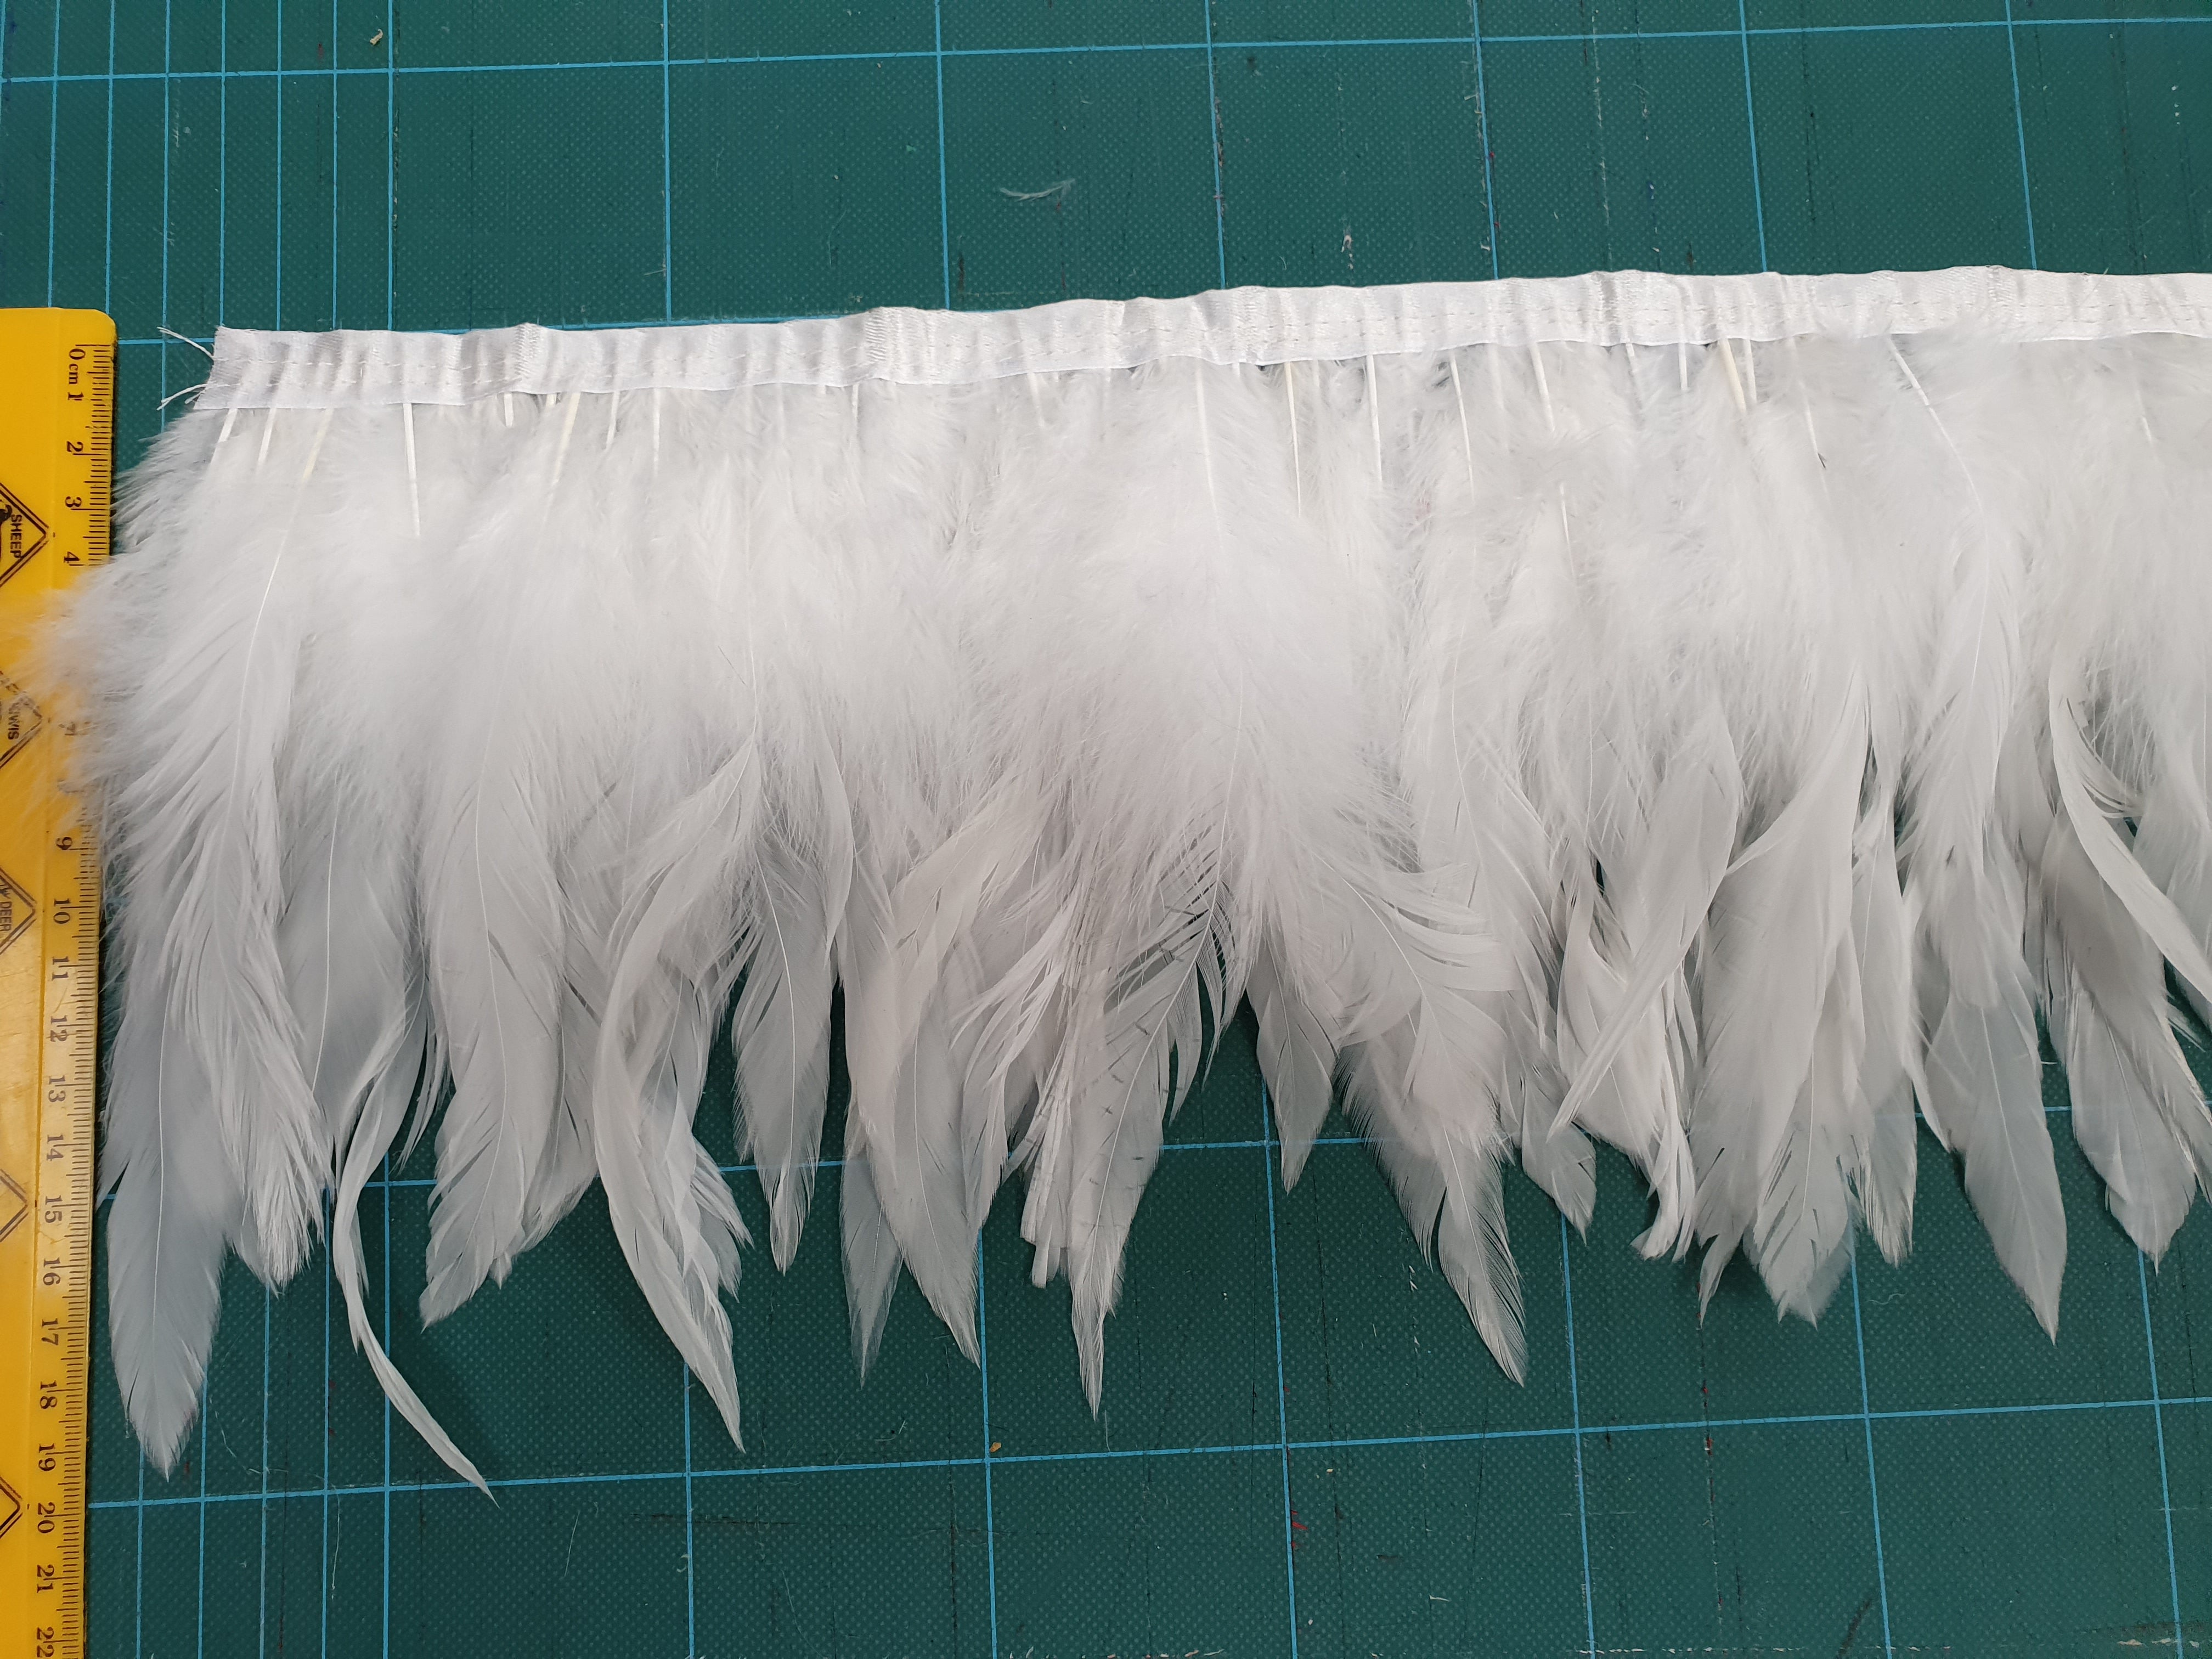 Pure White Rooster Feathers Sewn on Band